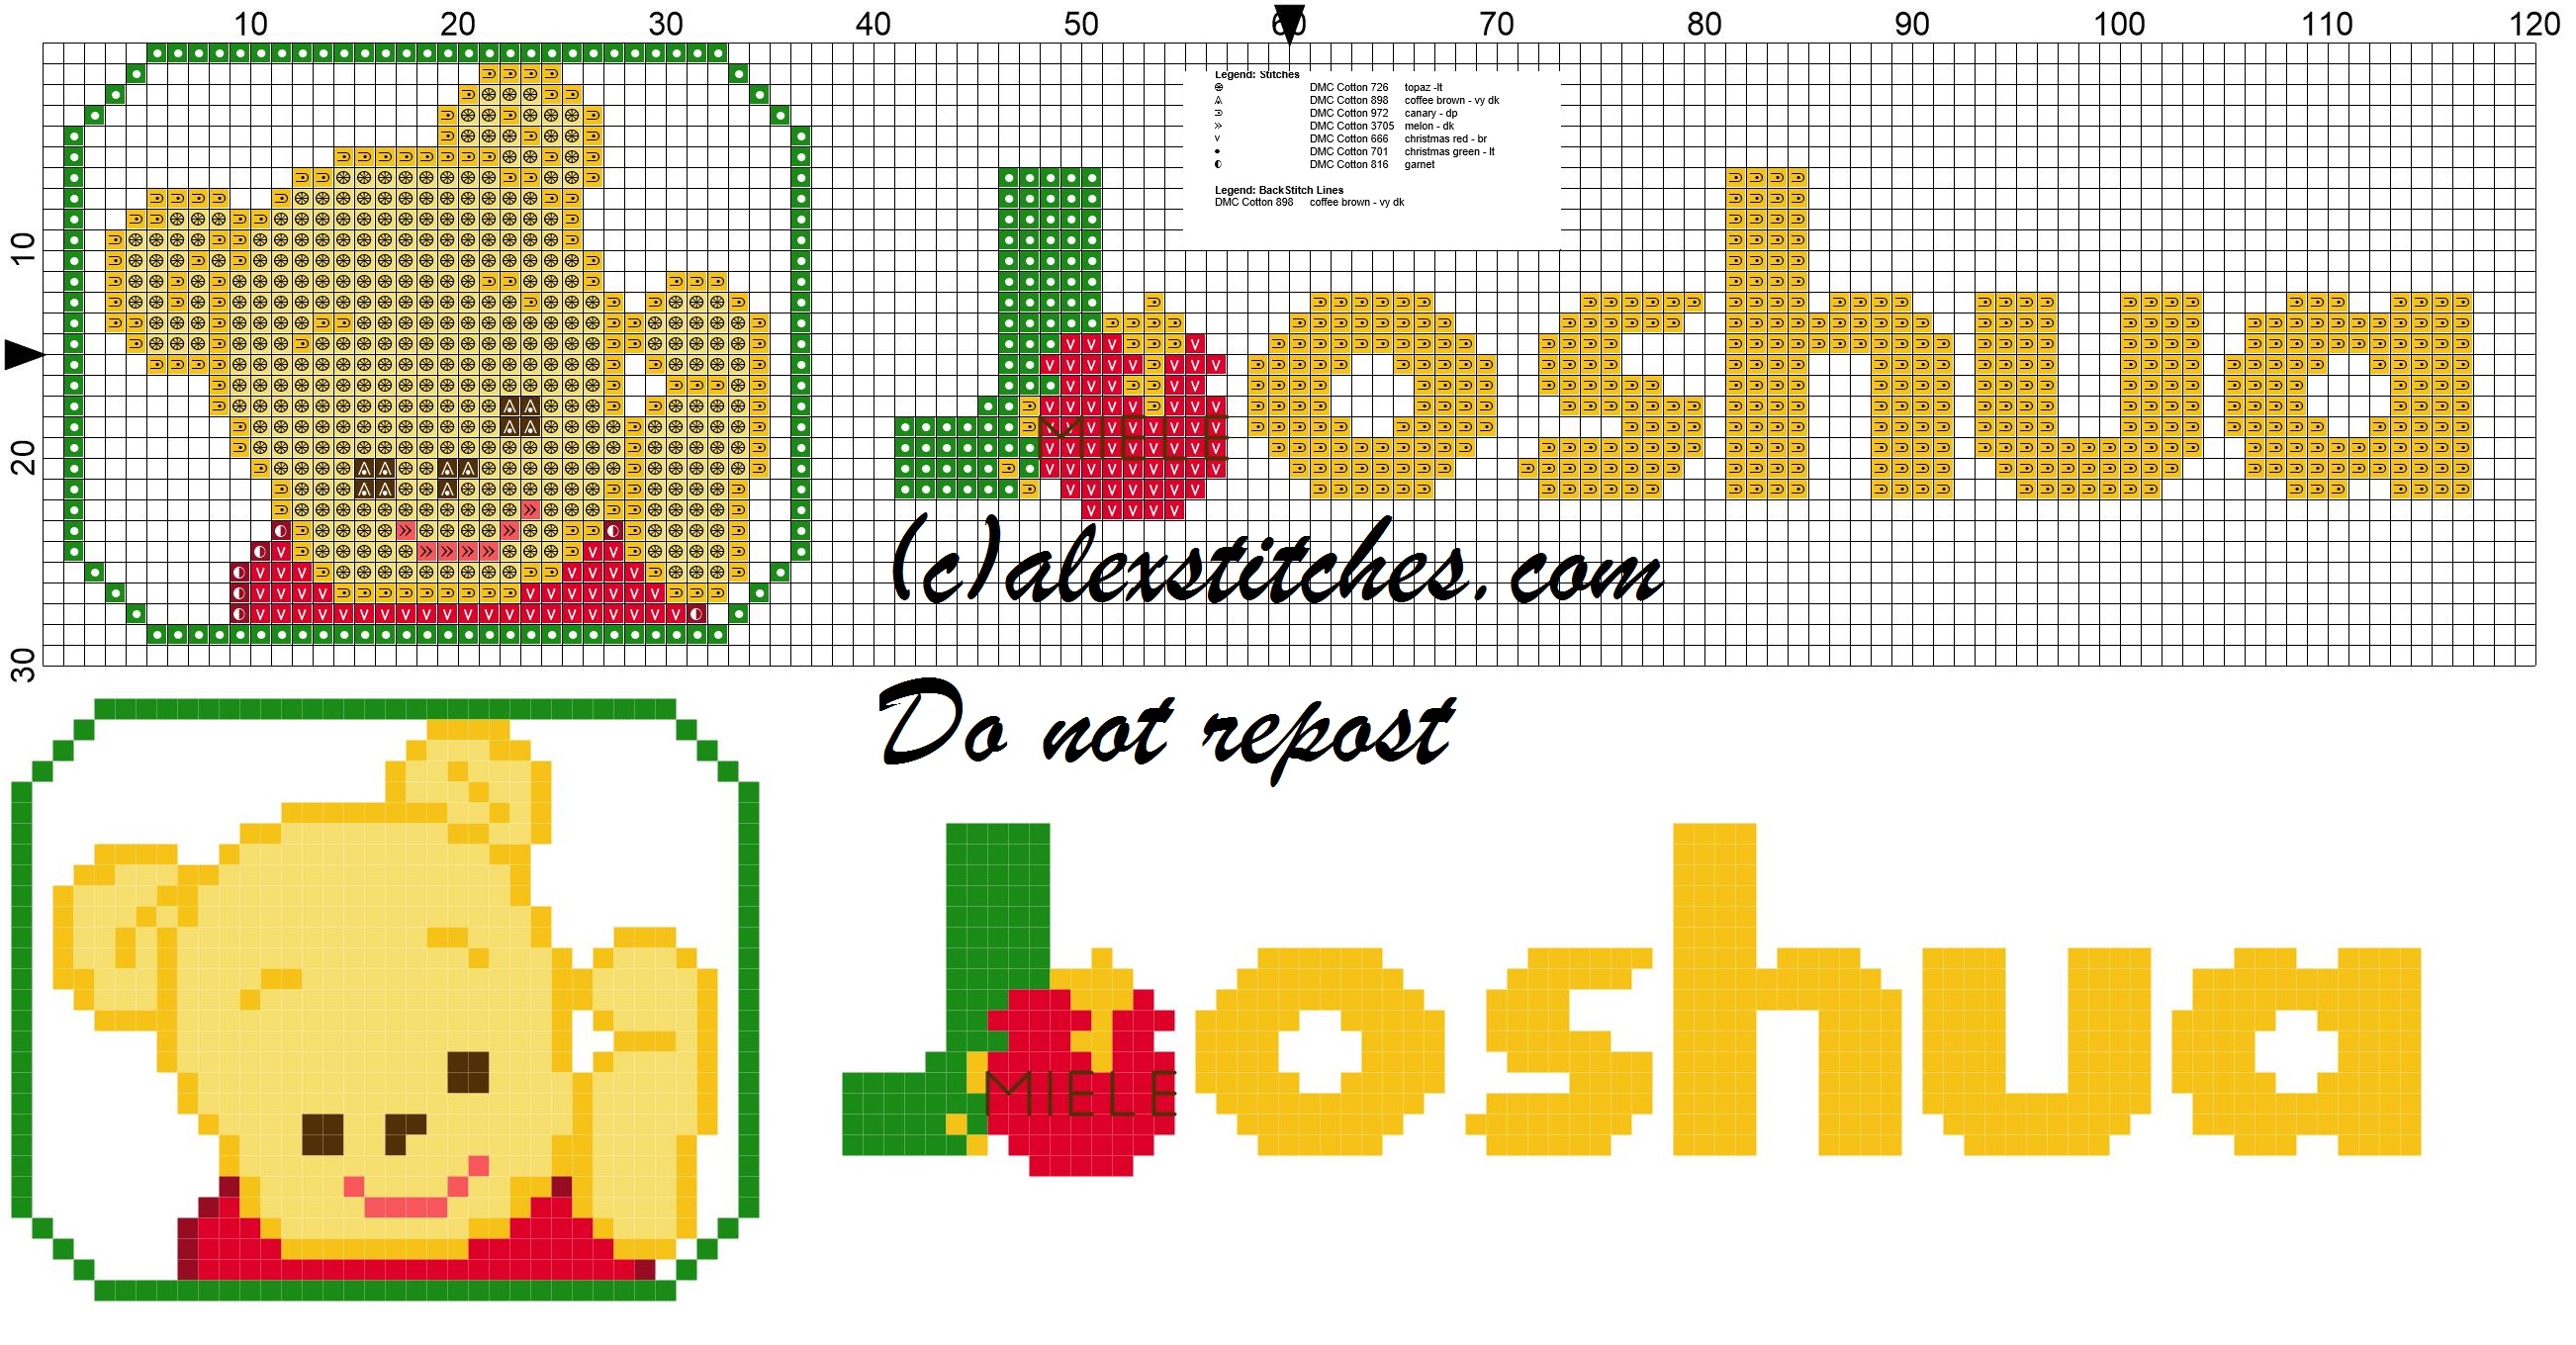 Joshua name with Baby winnie the pooh free cross stitches pattern